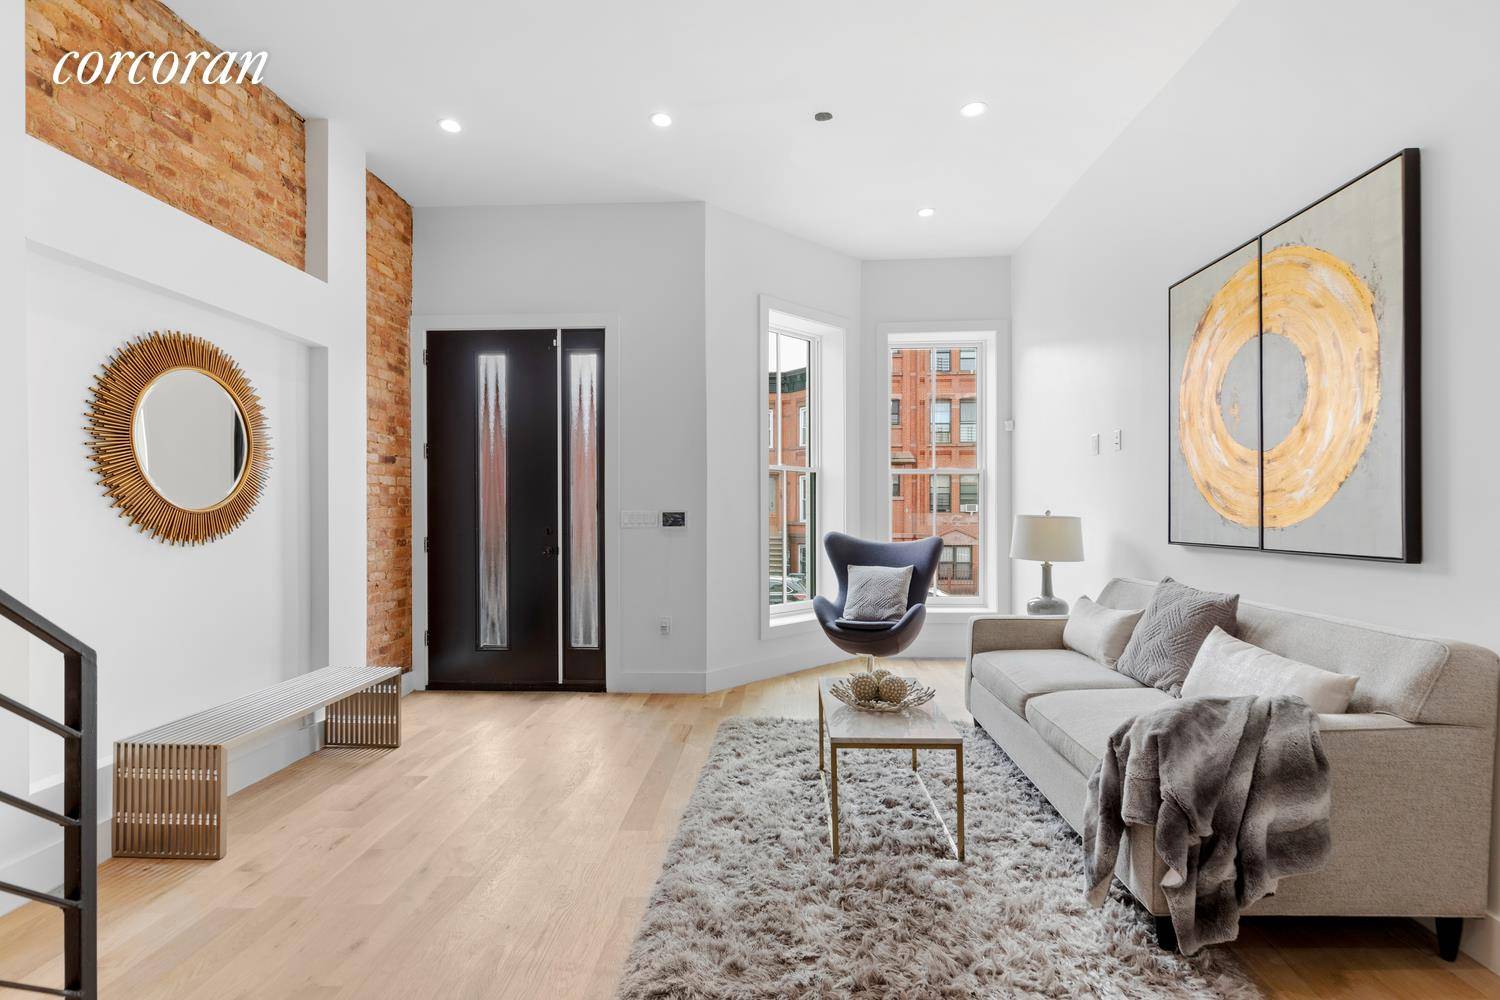 Welcome to 369 Herkimer Street ; a meticulously gut renovated four story, two family townhouse nestled within the heartbeat of Bedford Stuyvesant and just off the border of Crown Heights.